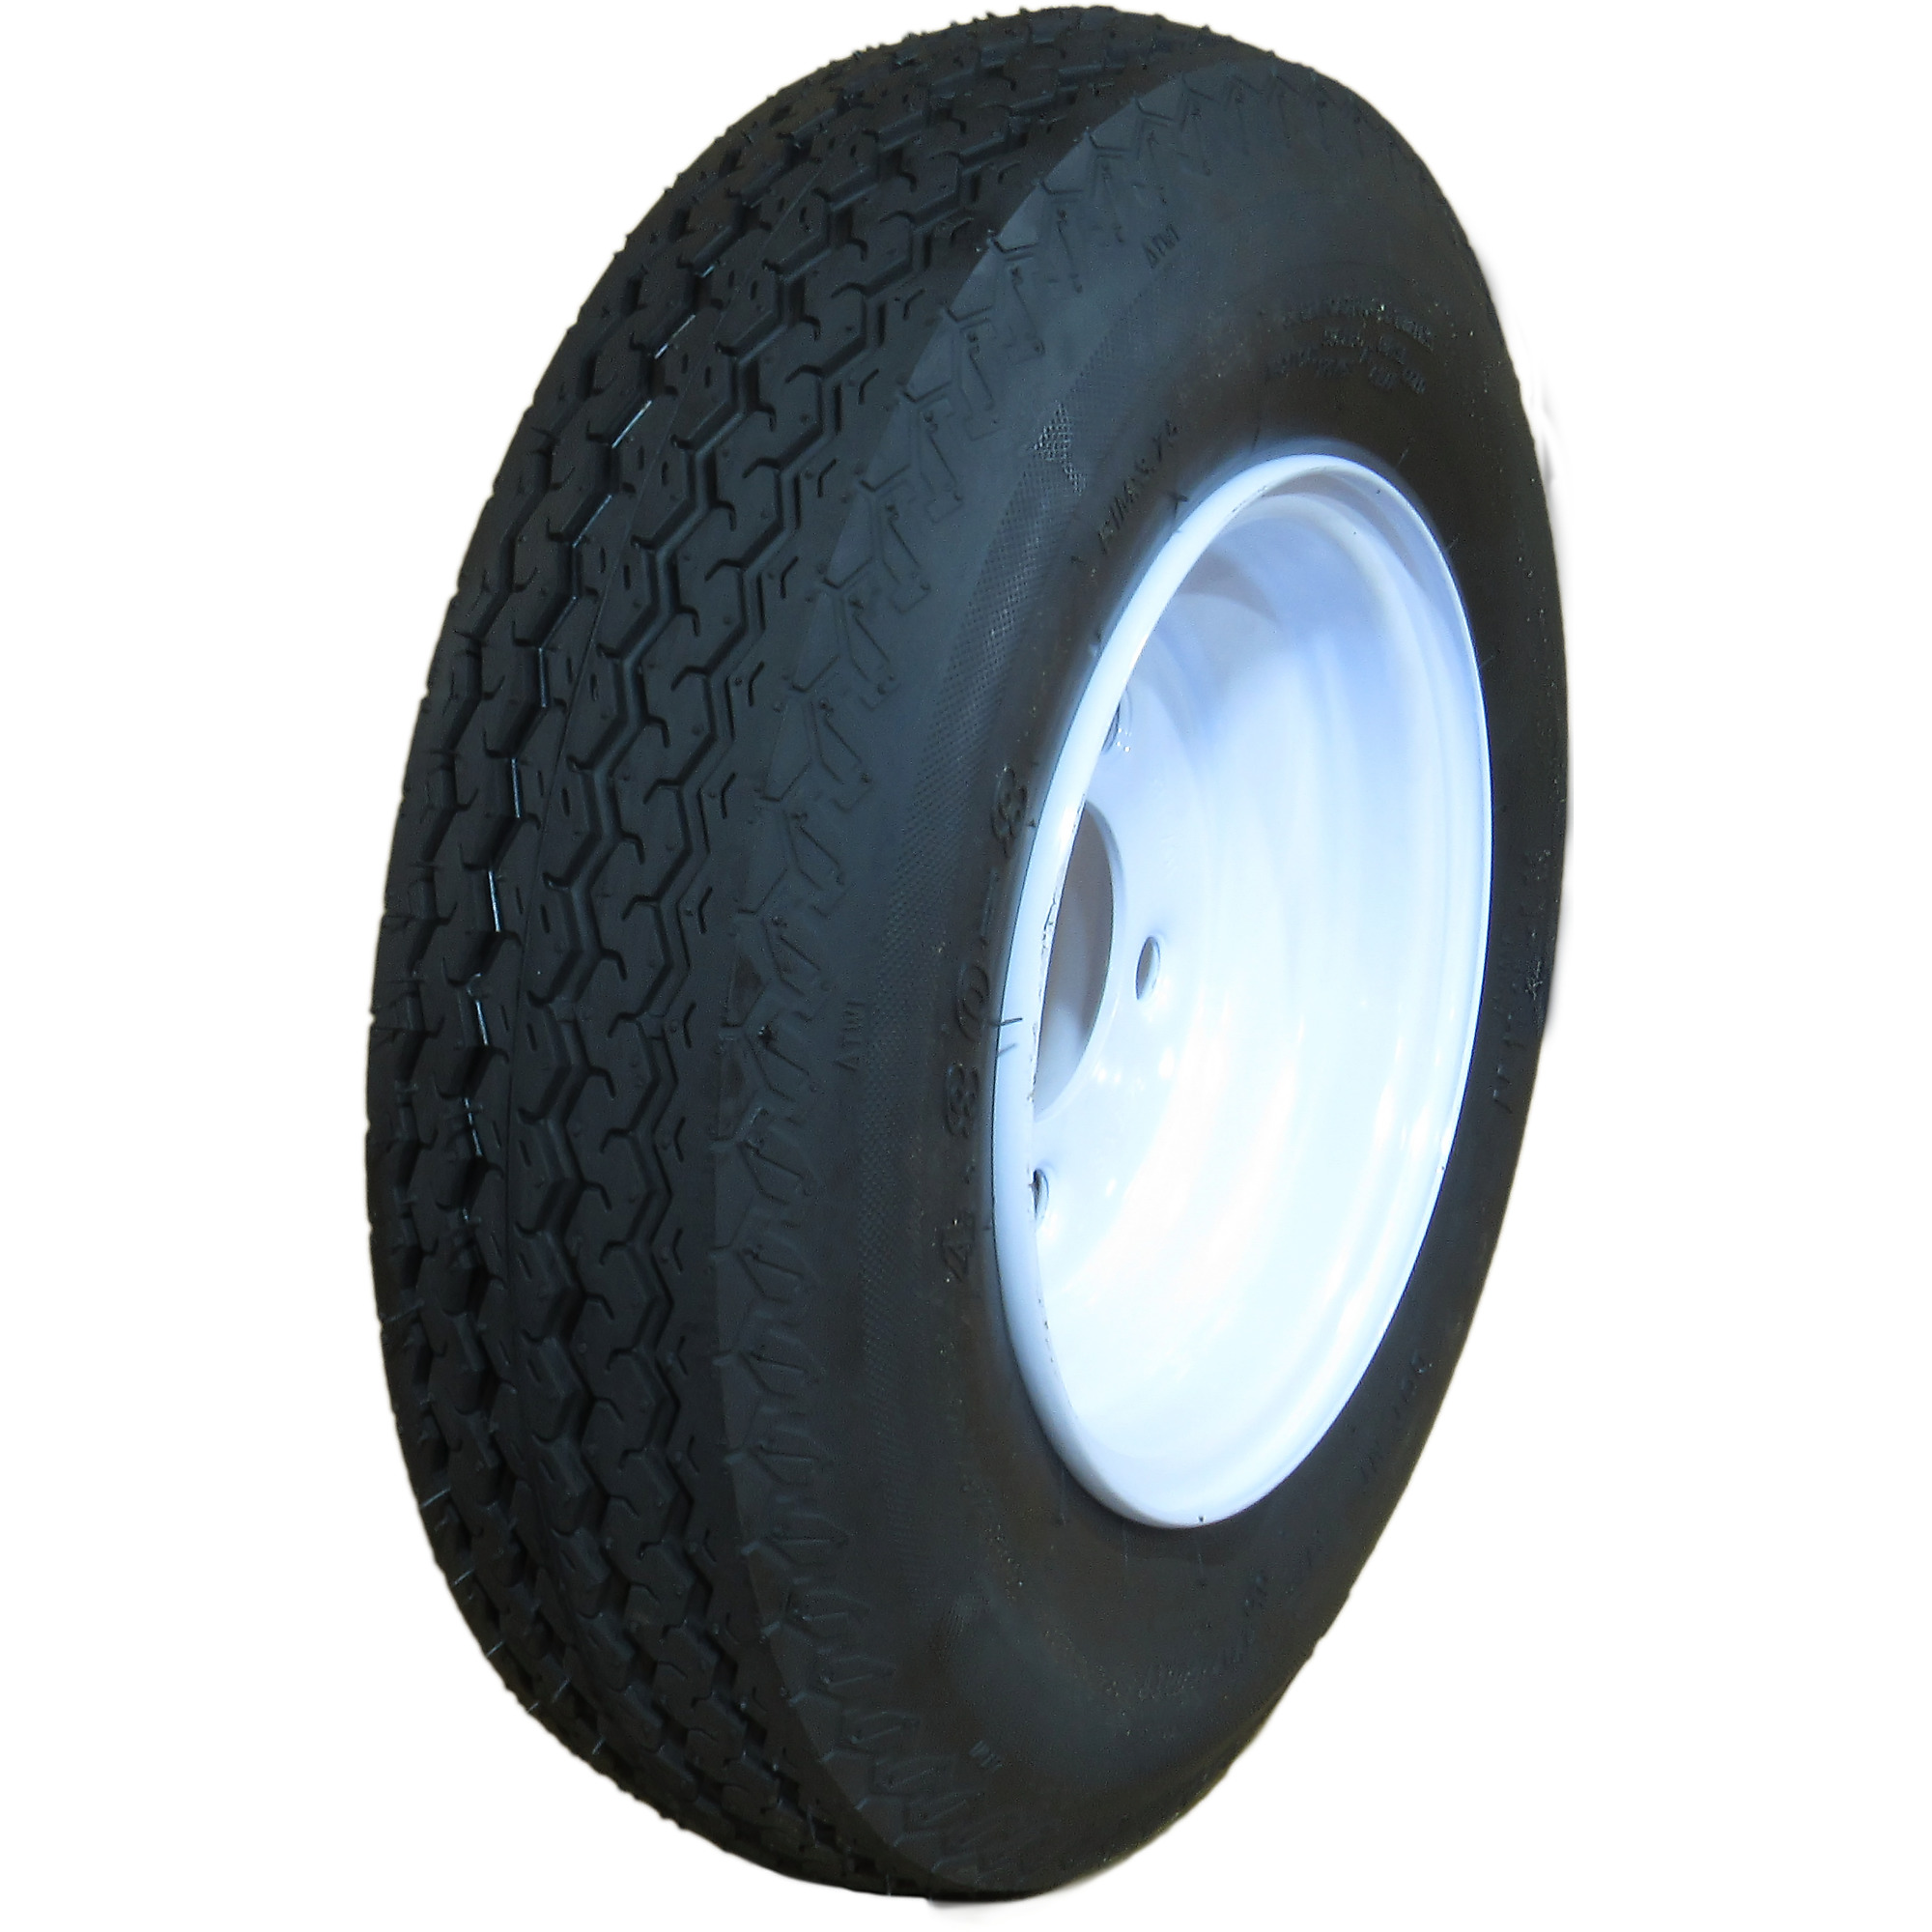 HI-RUN, Highway Trailer Tire Assembly, Bias-Ply, Tire Size 4.80-8 Load Range Rating C, Bolt Holes (qty.) 5 Model ASB1108